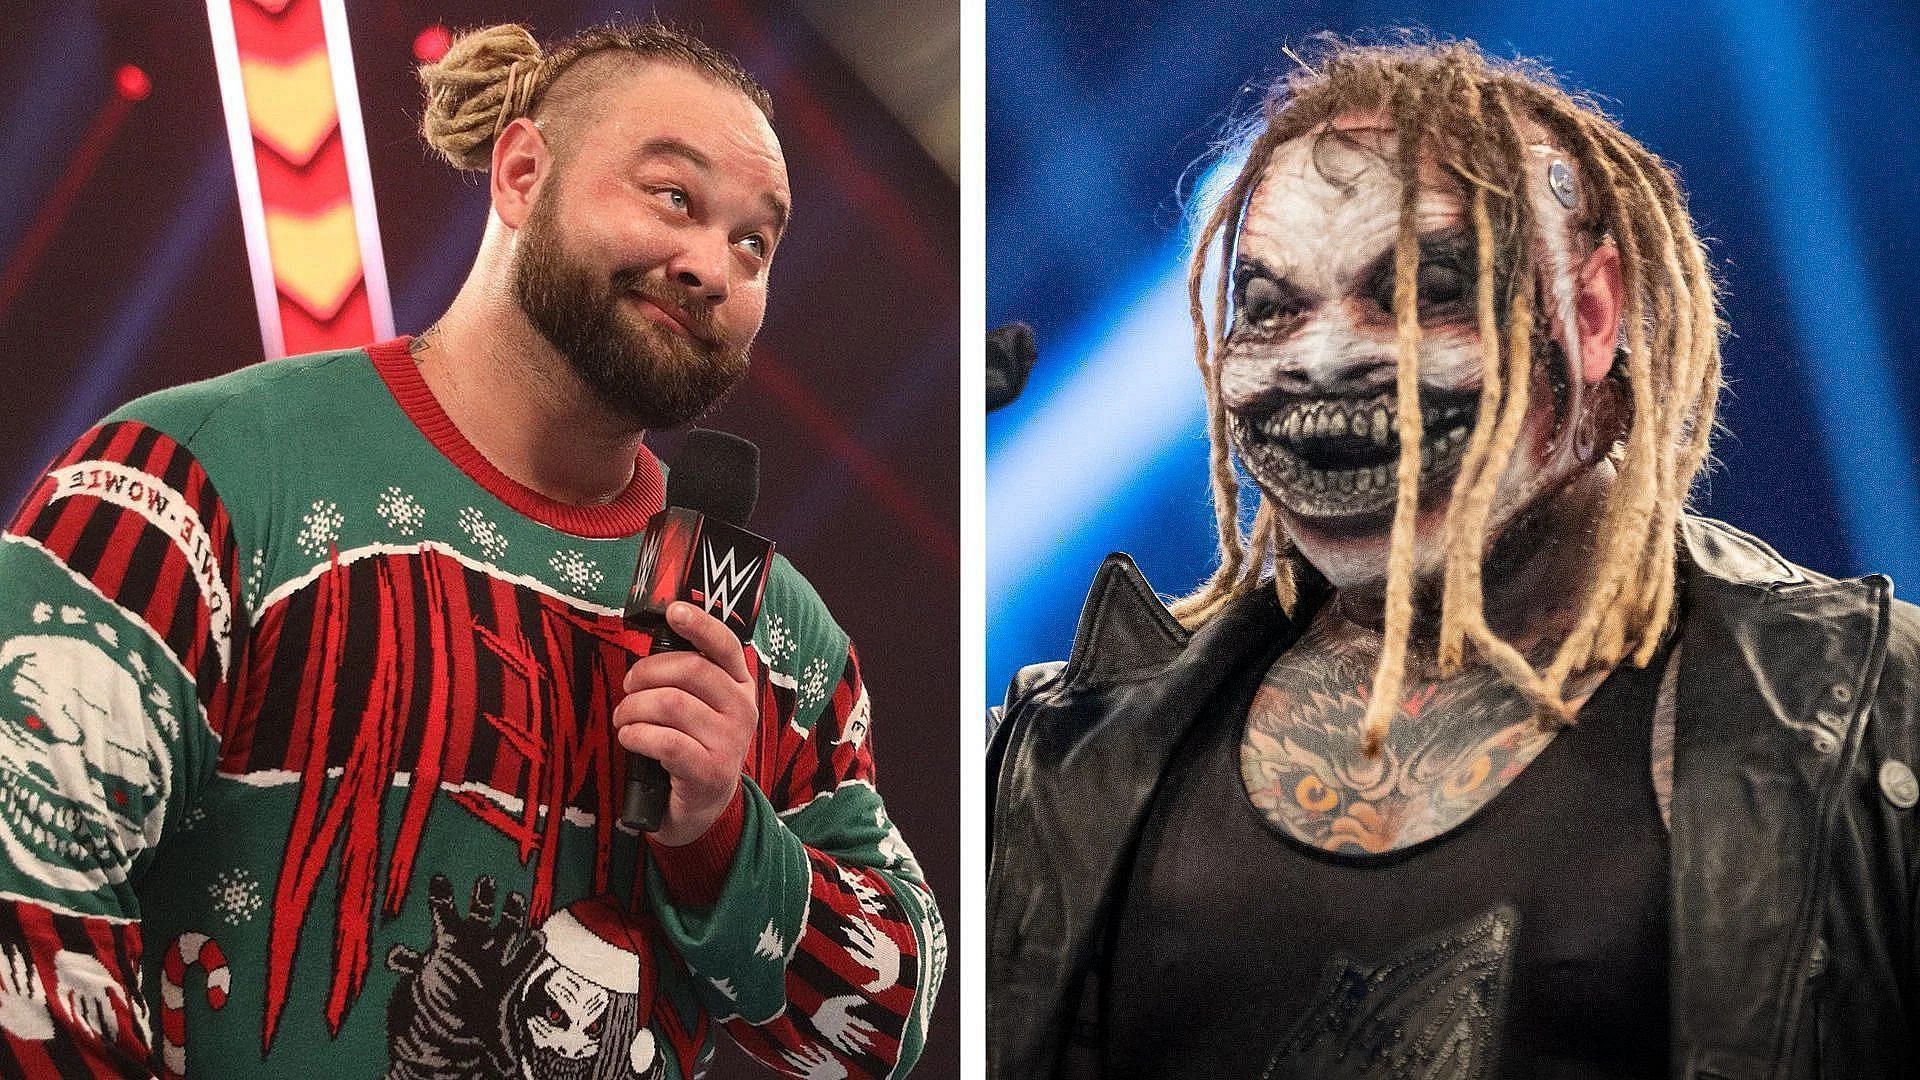 Bray Wyatt brought back the Fiend character